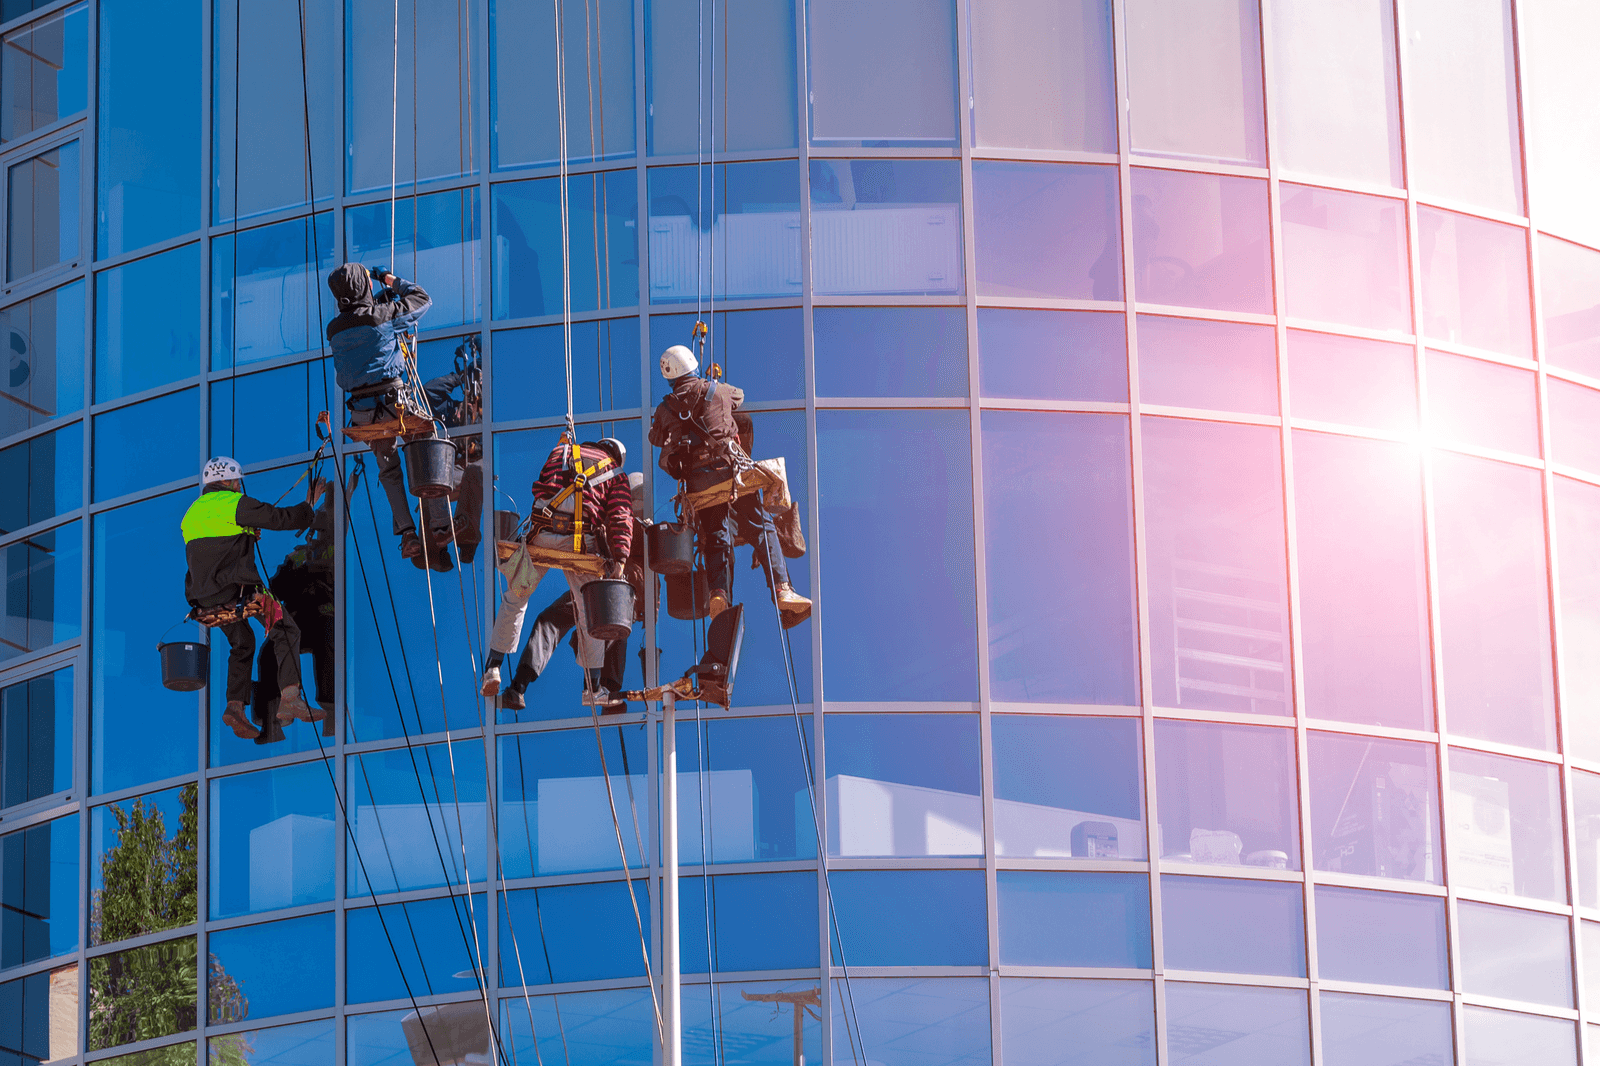 Men in harnesses washing windows on the side of a tall building